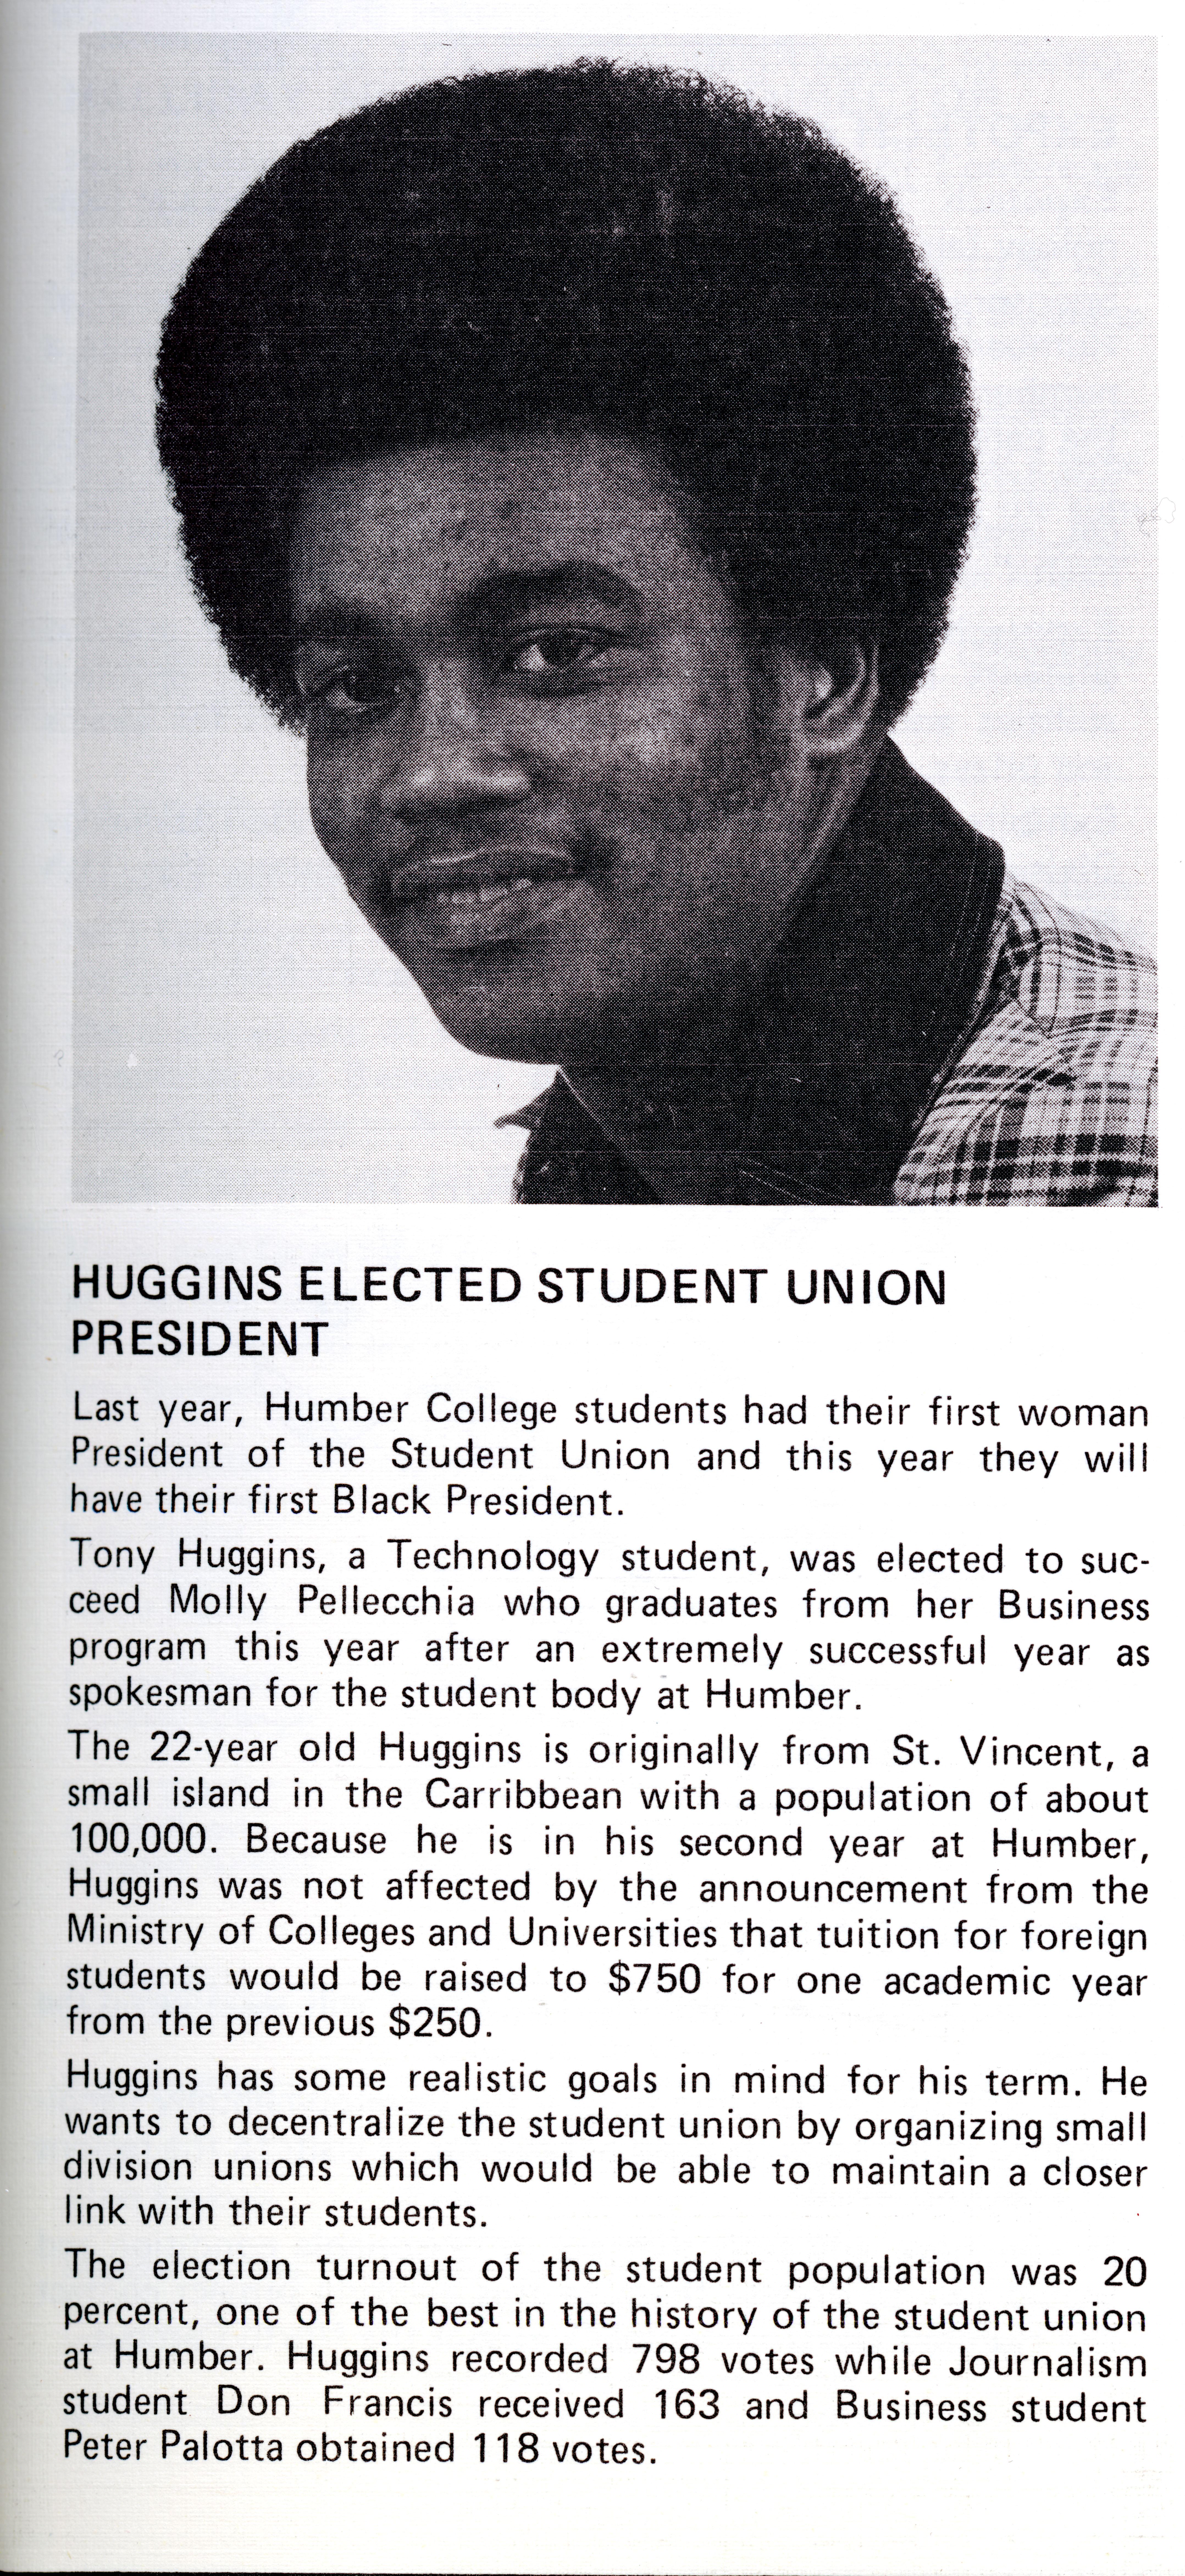 A newspaper clipping about Tony Huggins being elected student union president.